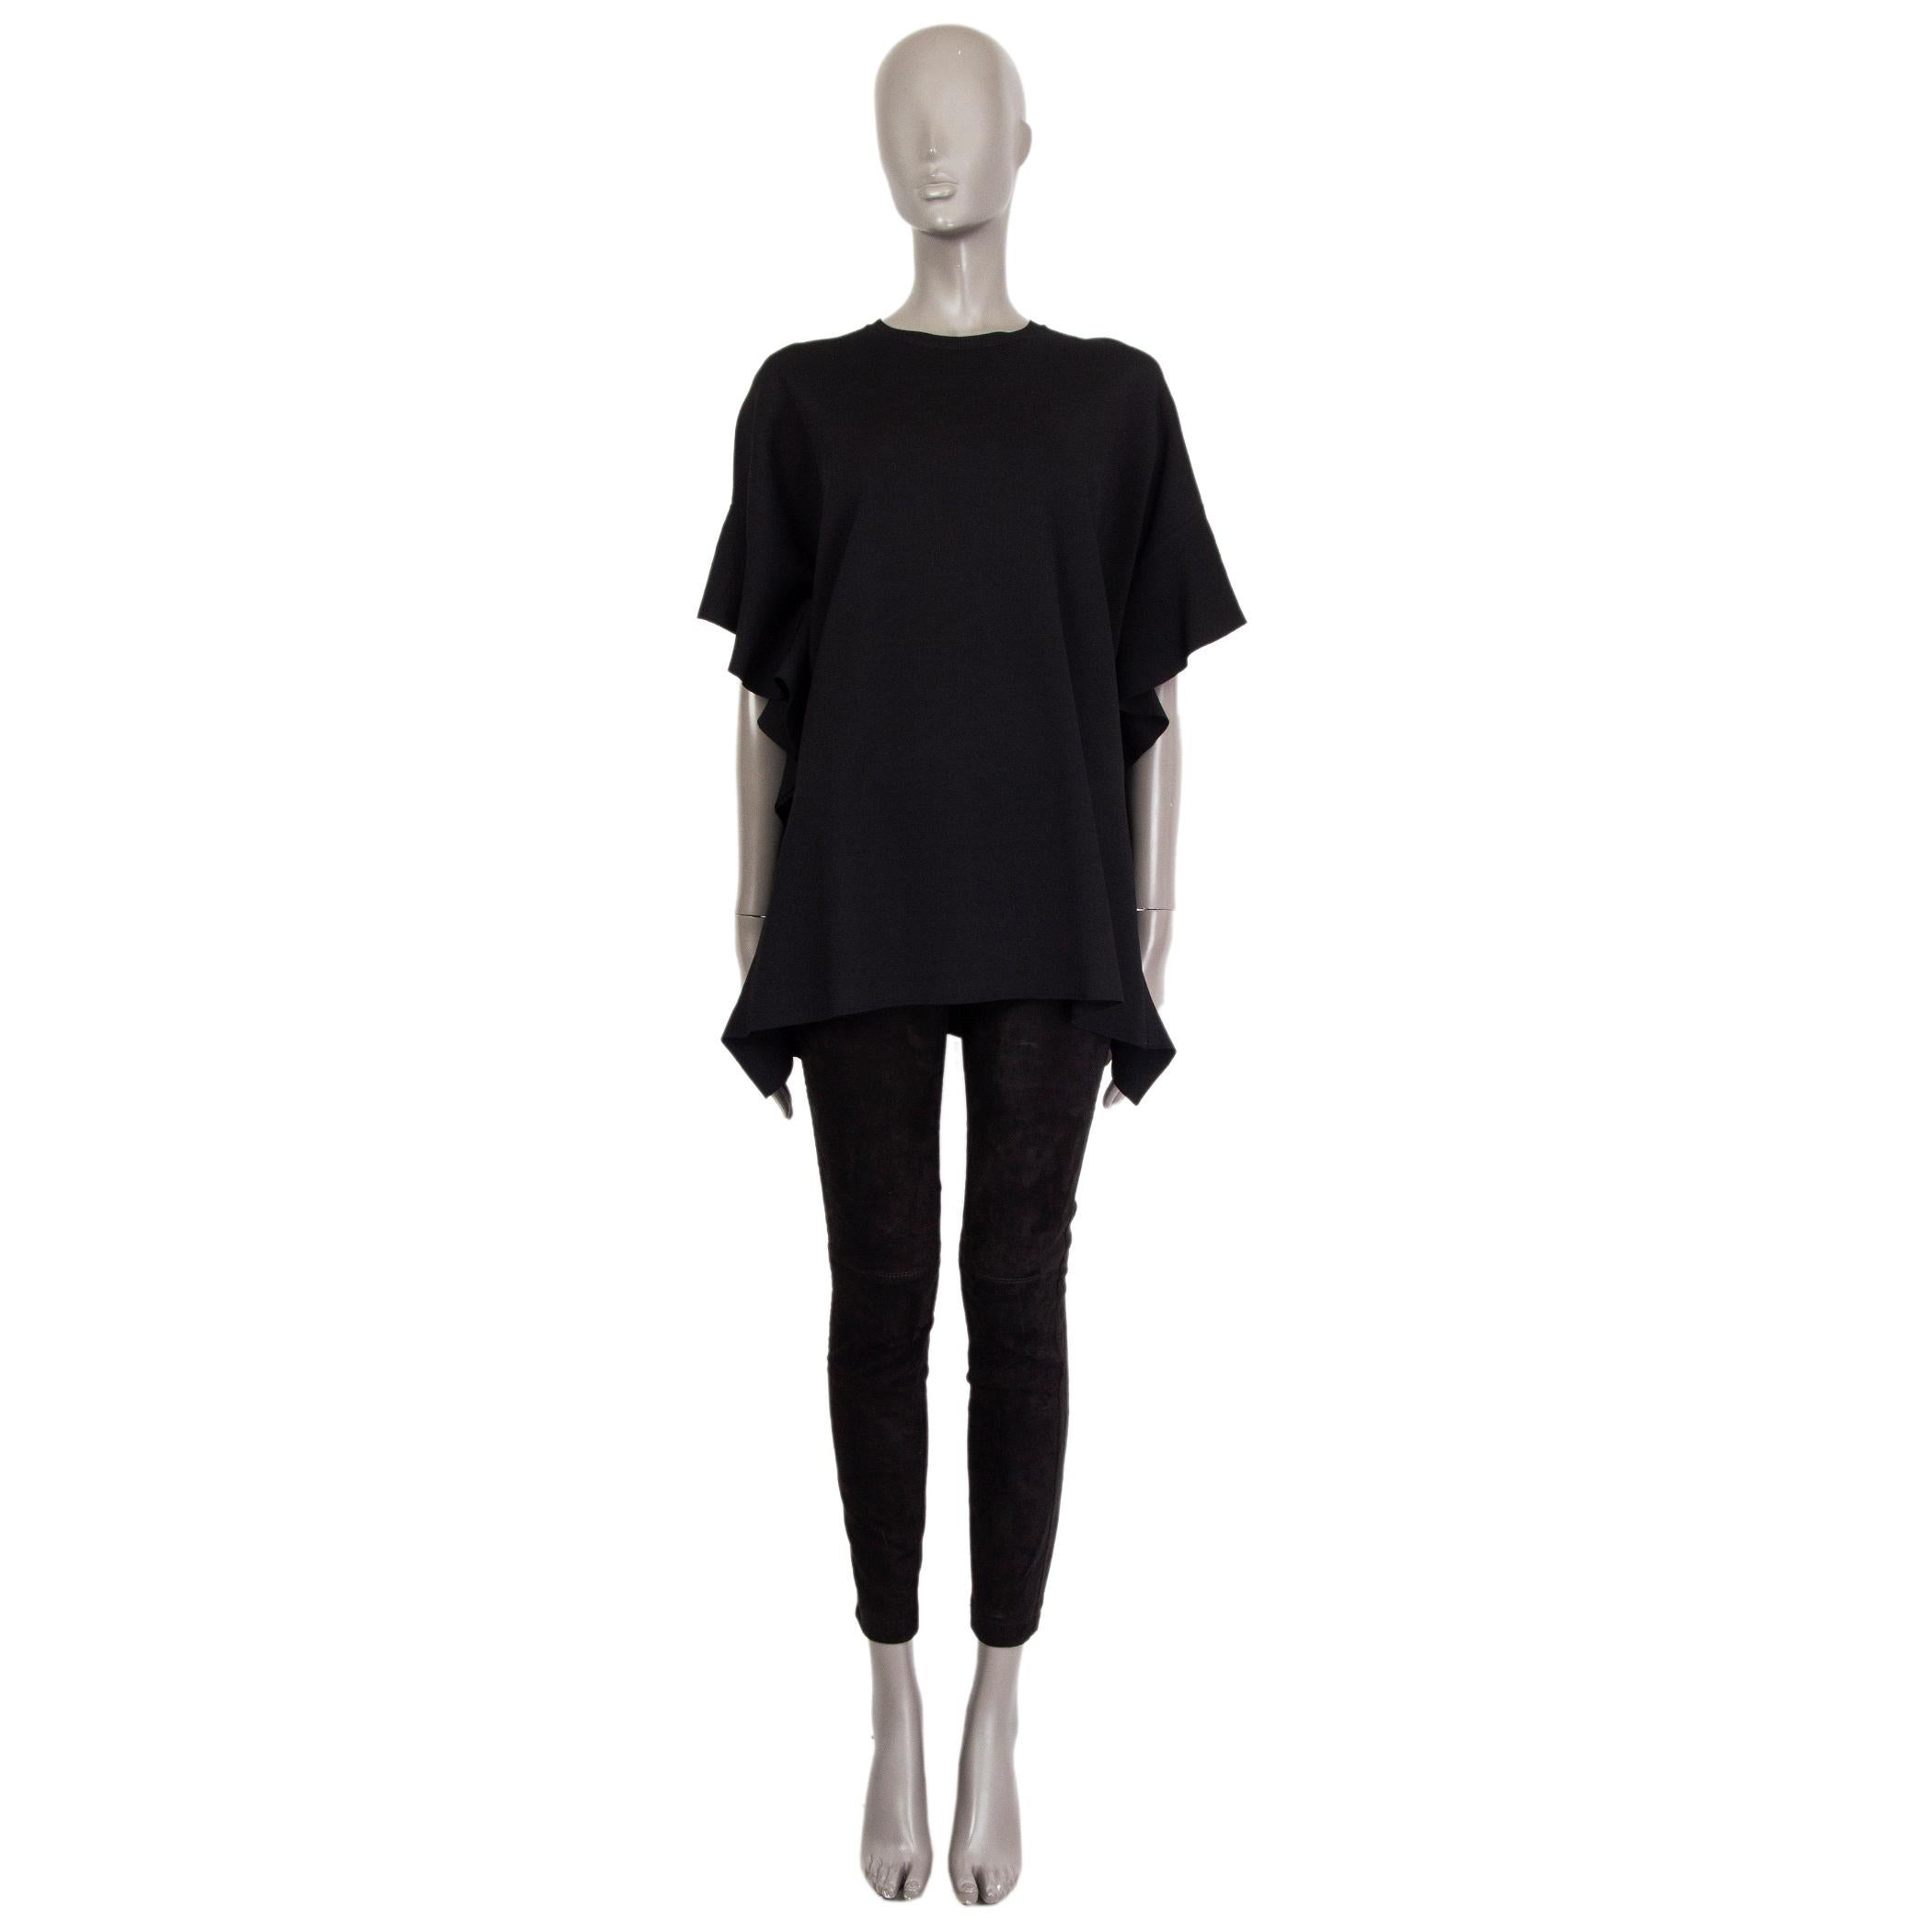 Valentino short-sleeve knit blouse in black viscose-blend (assume as tag is missing) with a crew-neck and ruffled-seams. Unlined. Has been worn and is in excellent condition. 

Tag Size Missing Size
Size S
Shoulder Width 41cm (16in)
Bust 122cm